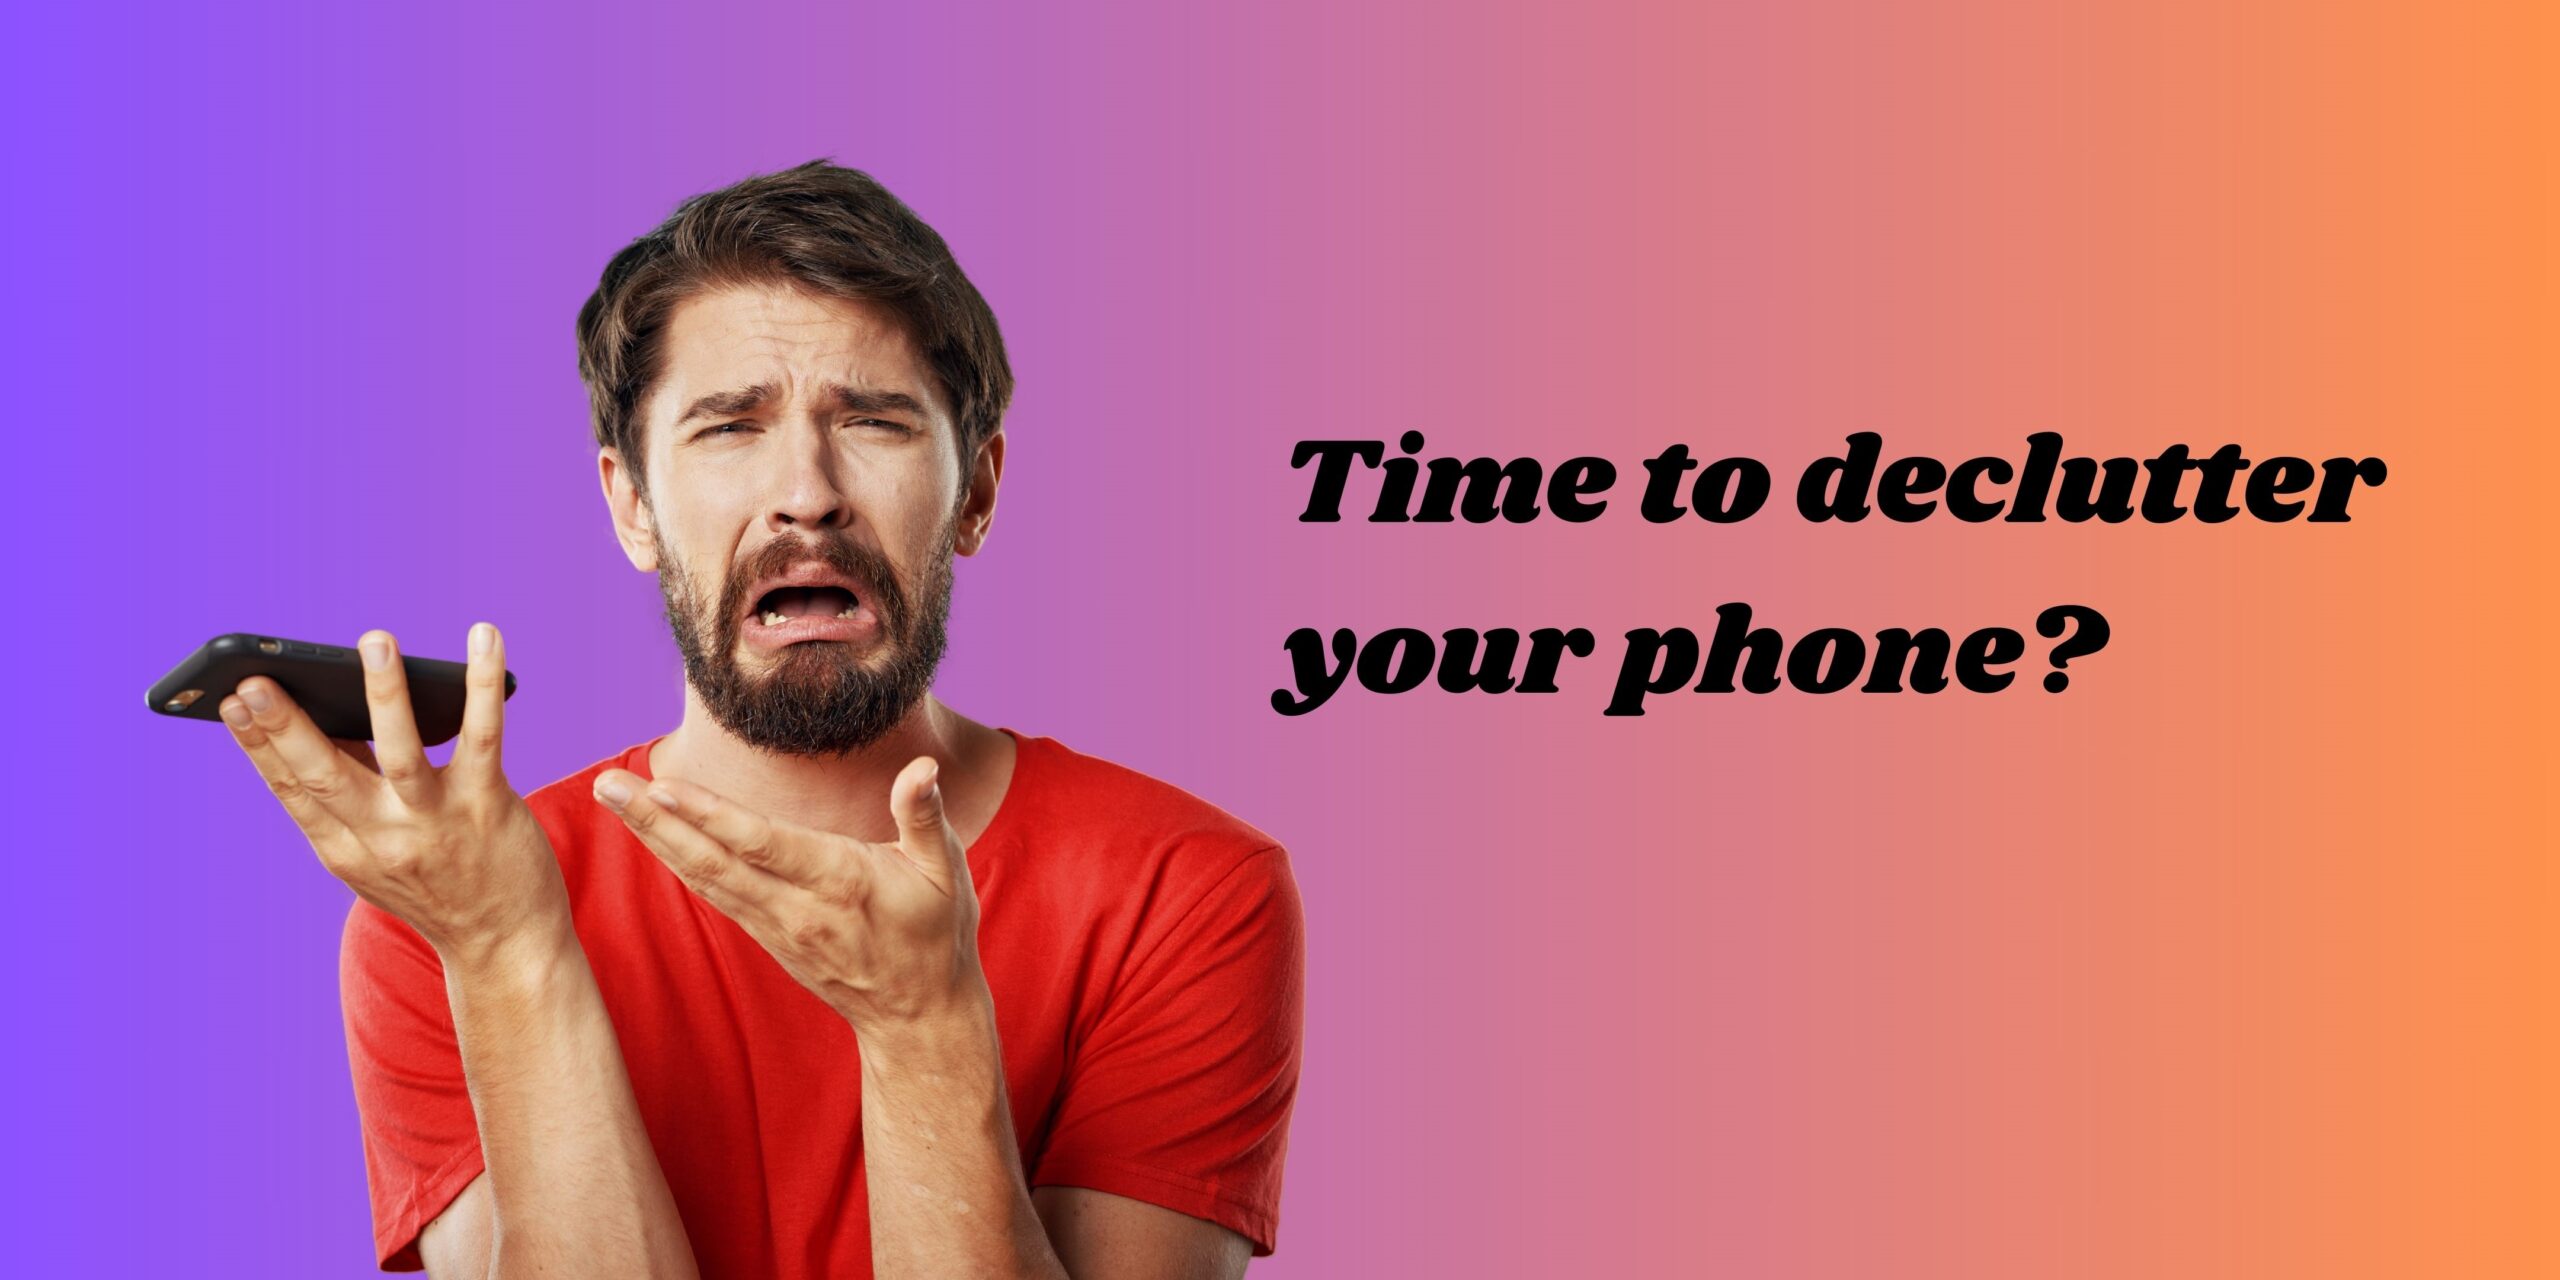 Man looking stressed with a mobile phone in hand.